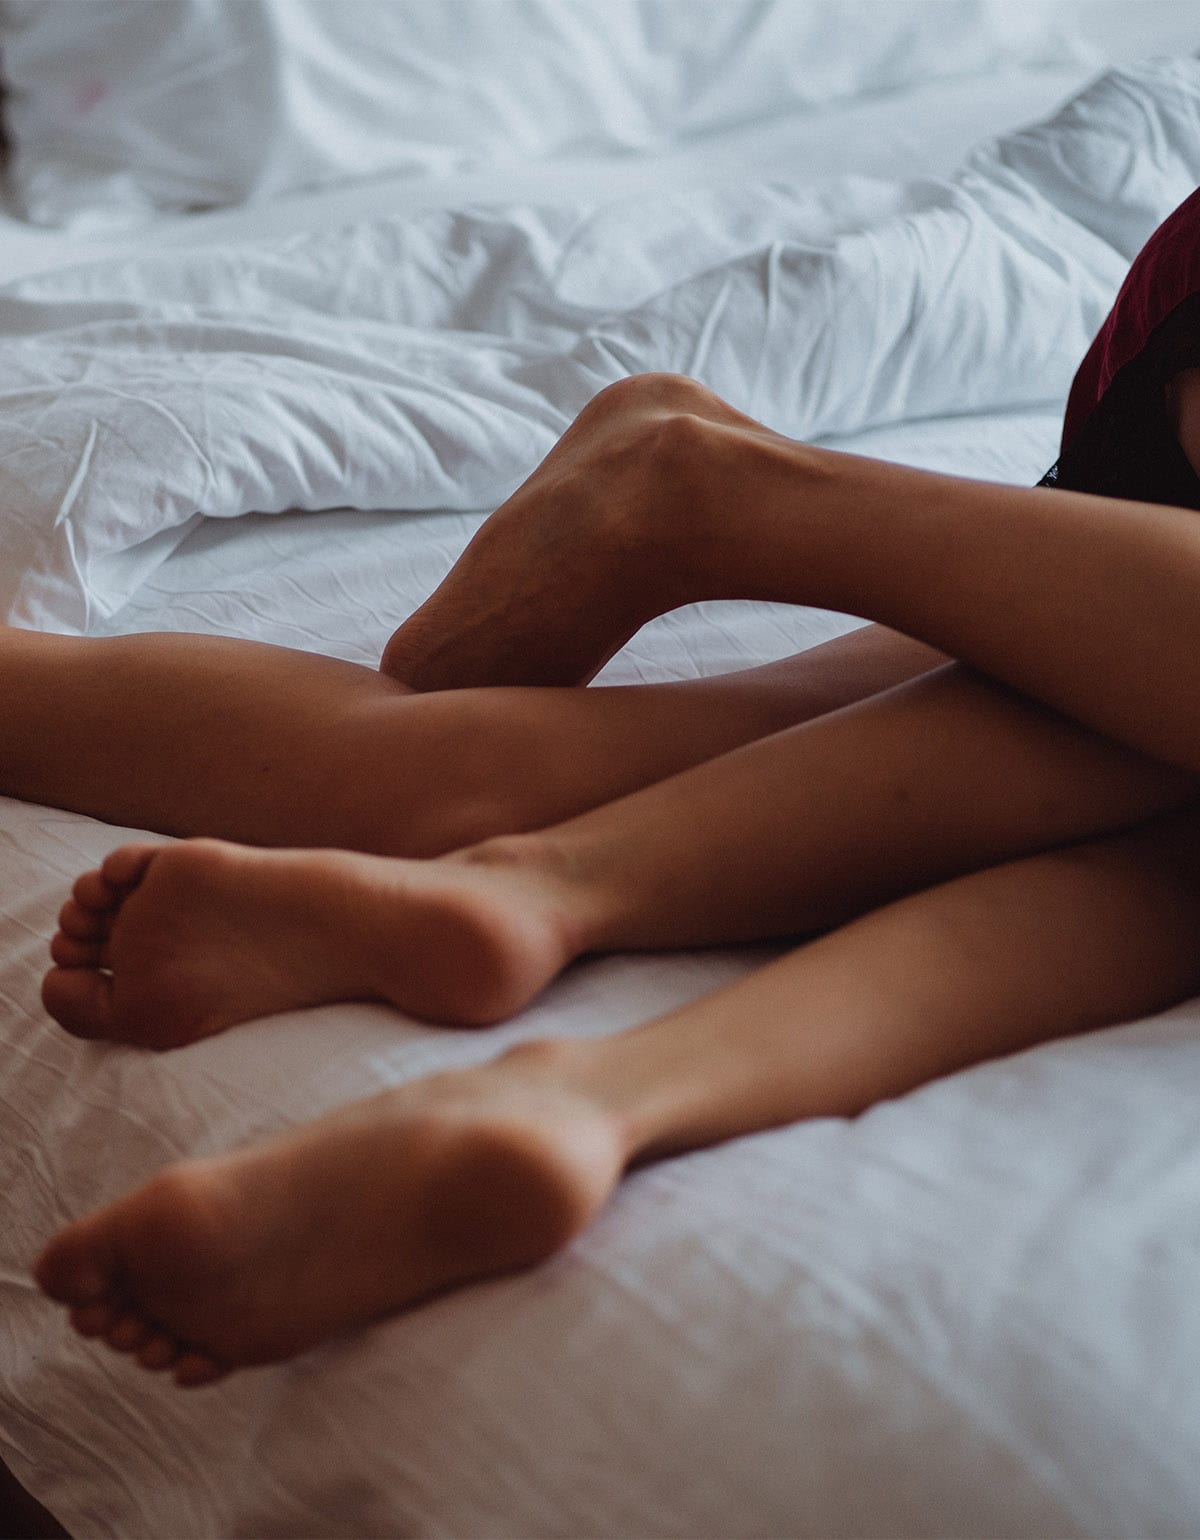 Period sex is a queer issue